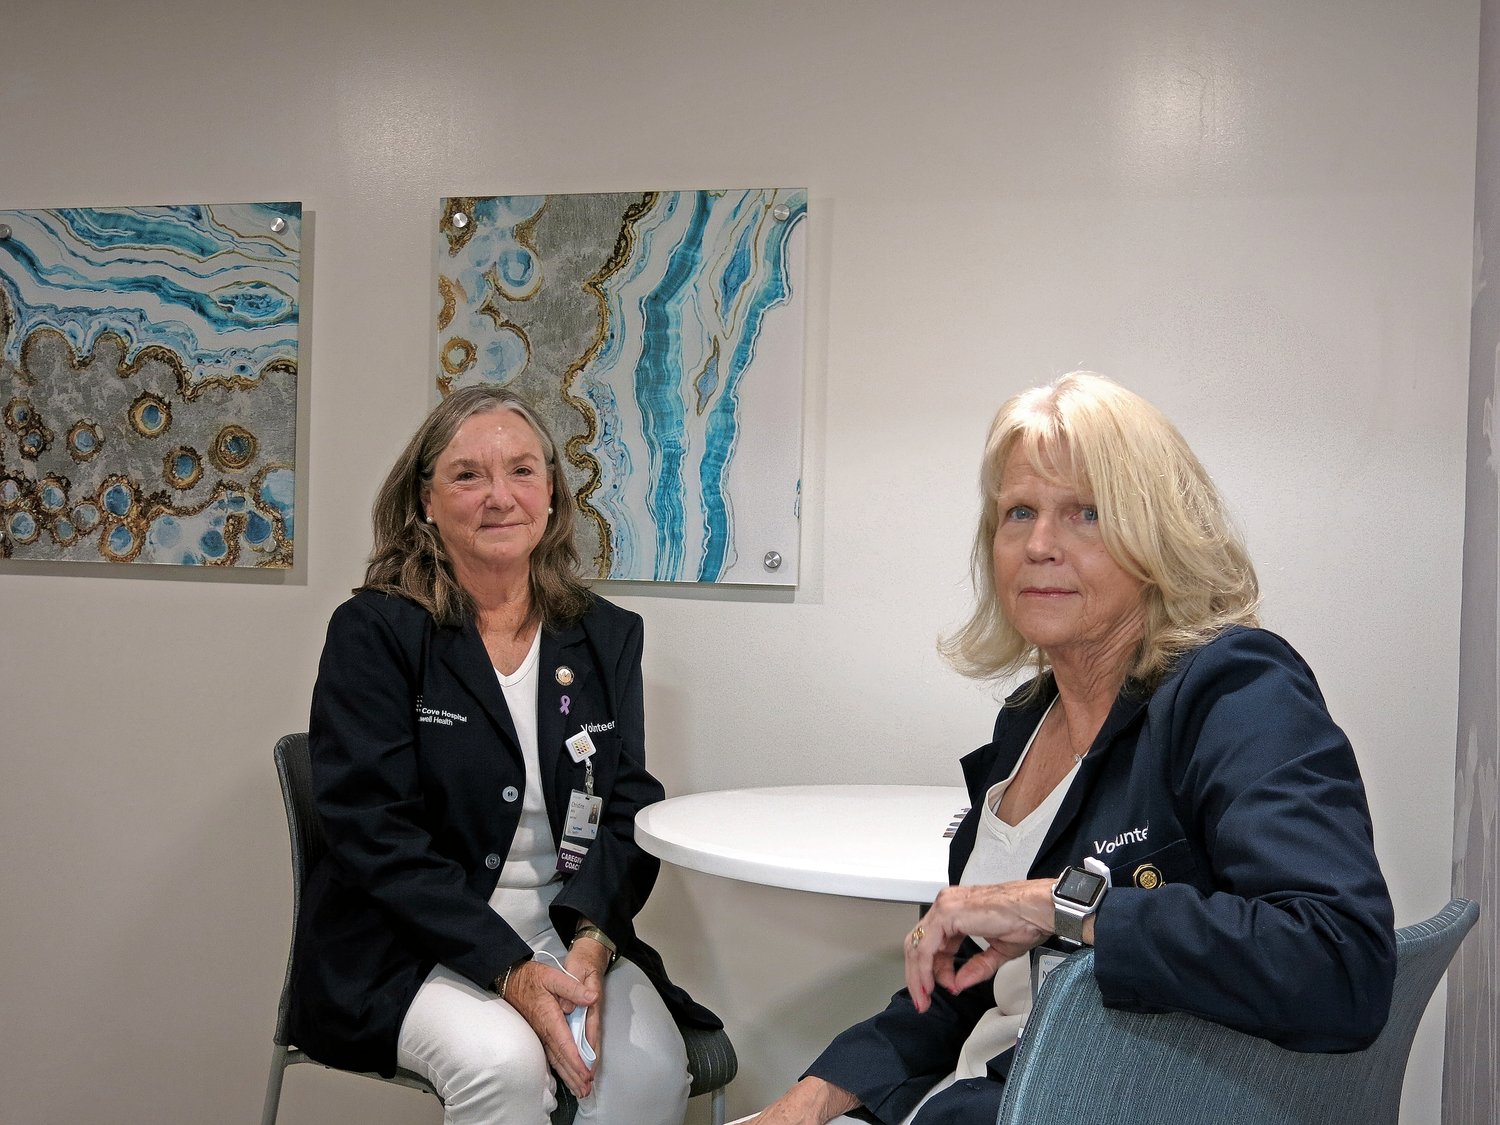 Christine Mills, far left, and Nancy White, in one of the rooms at the Caregiver Center, say their work as volunteer caregiver coaches at Glen Cove Hospital is rewarding.